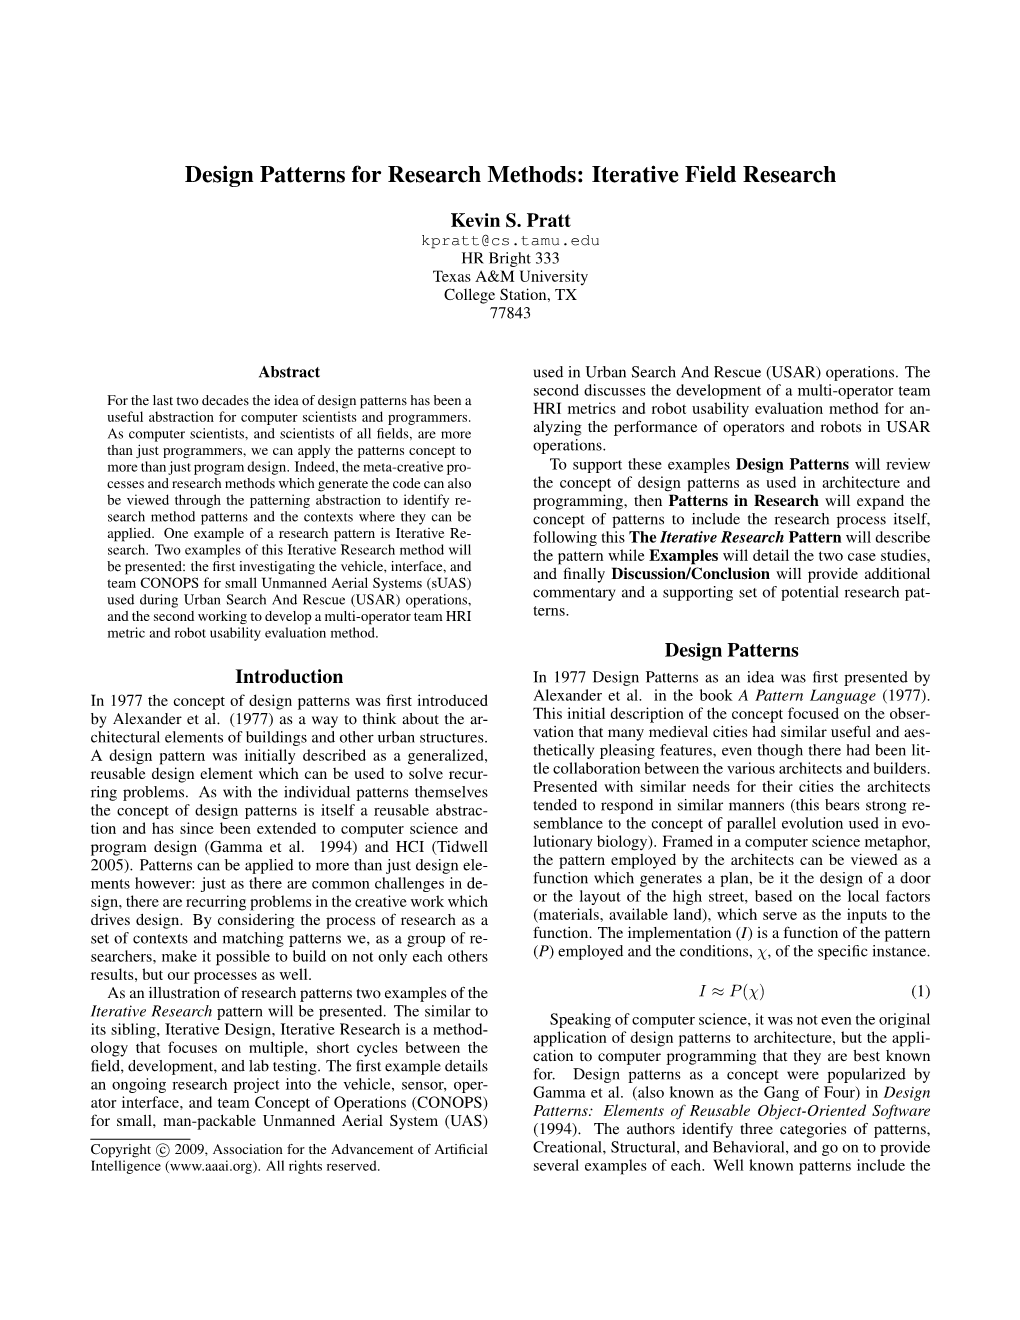 Design Patterns for Research Methods: Iterative Field Research